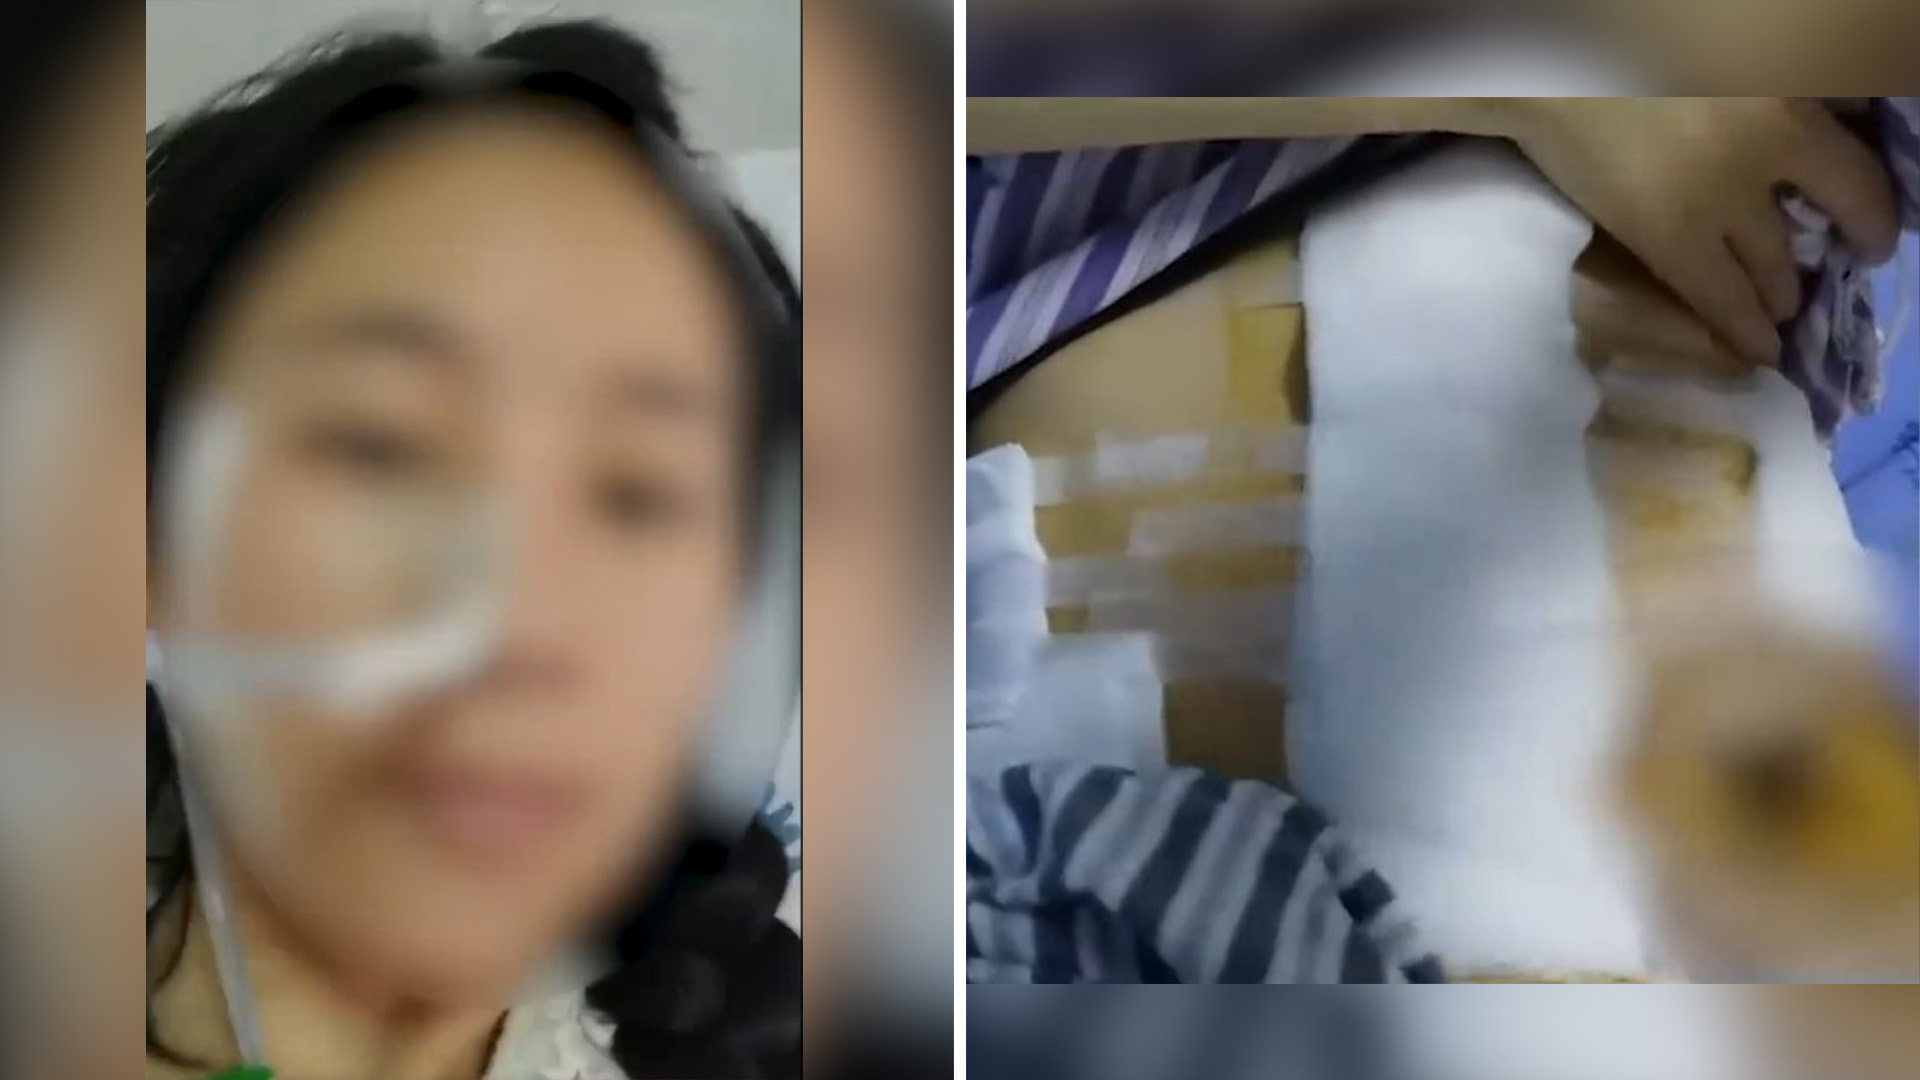 A woman in China has been left needing to wear a colostomy bag for the rest of her life after a string of violent attacks by her husband over a two-year period. Photo: SCMP composite/Weibo